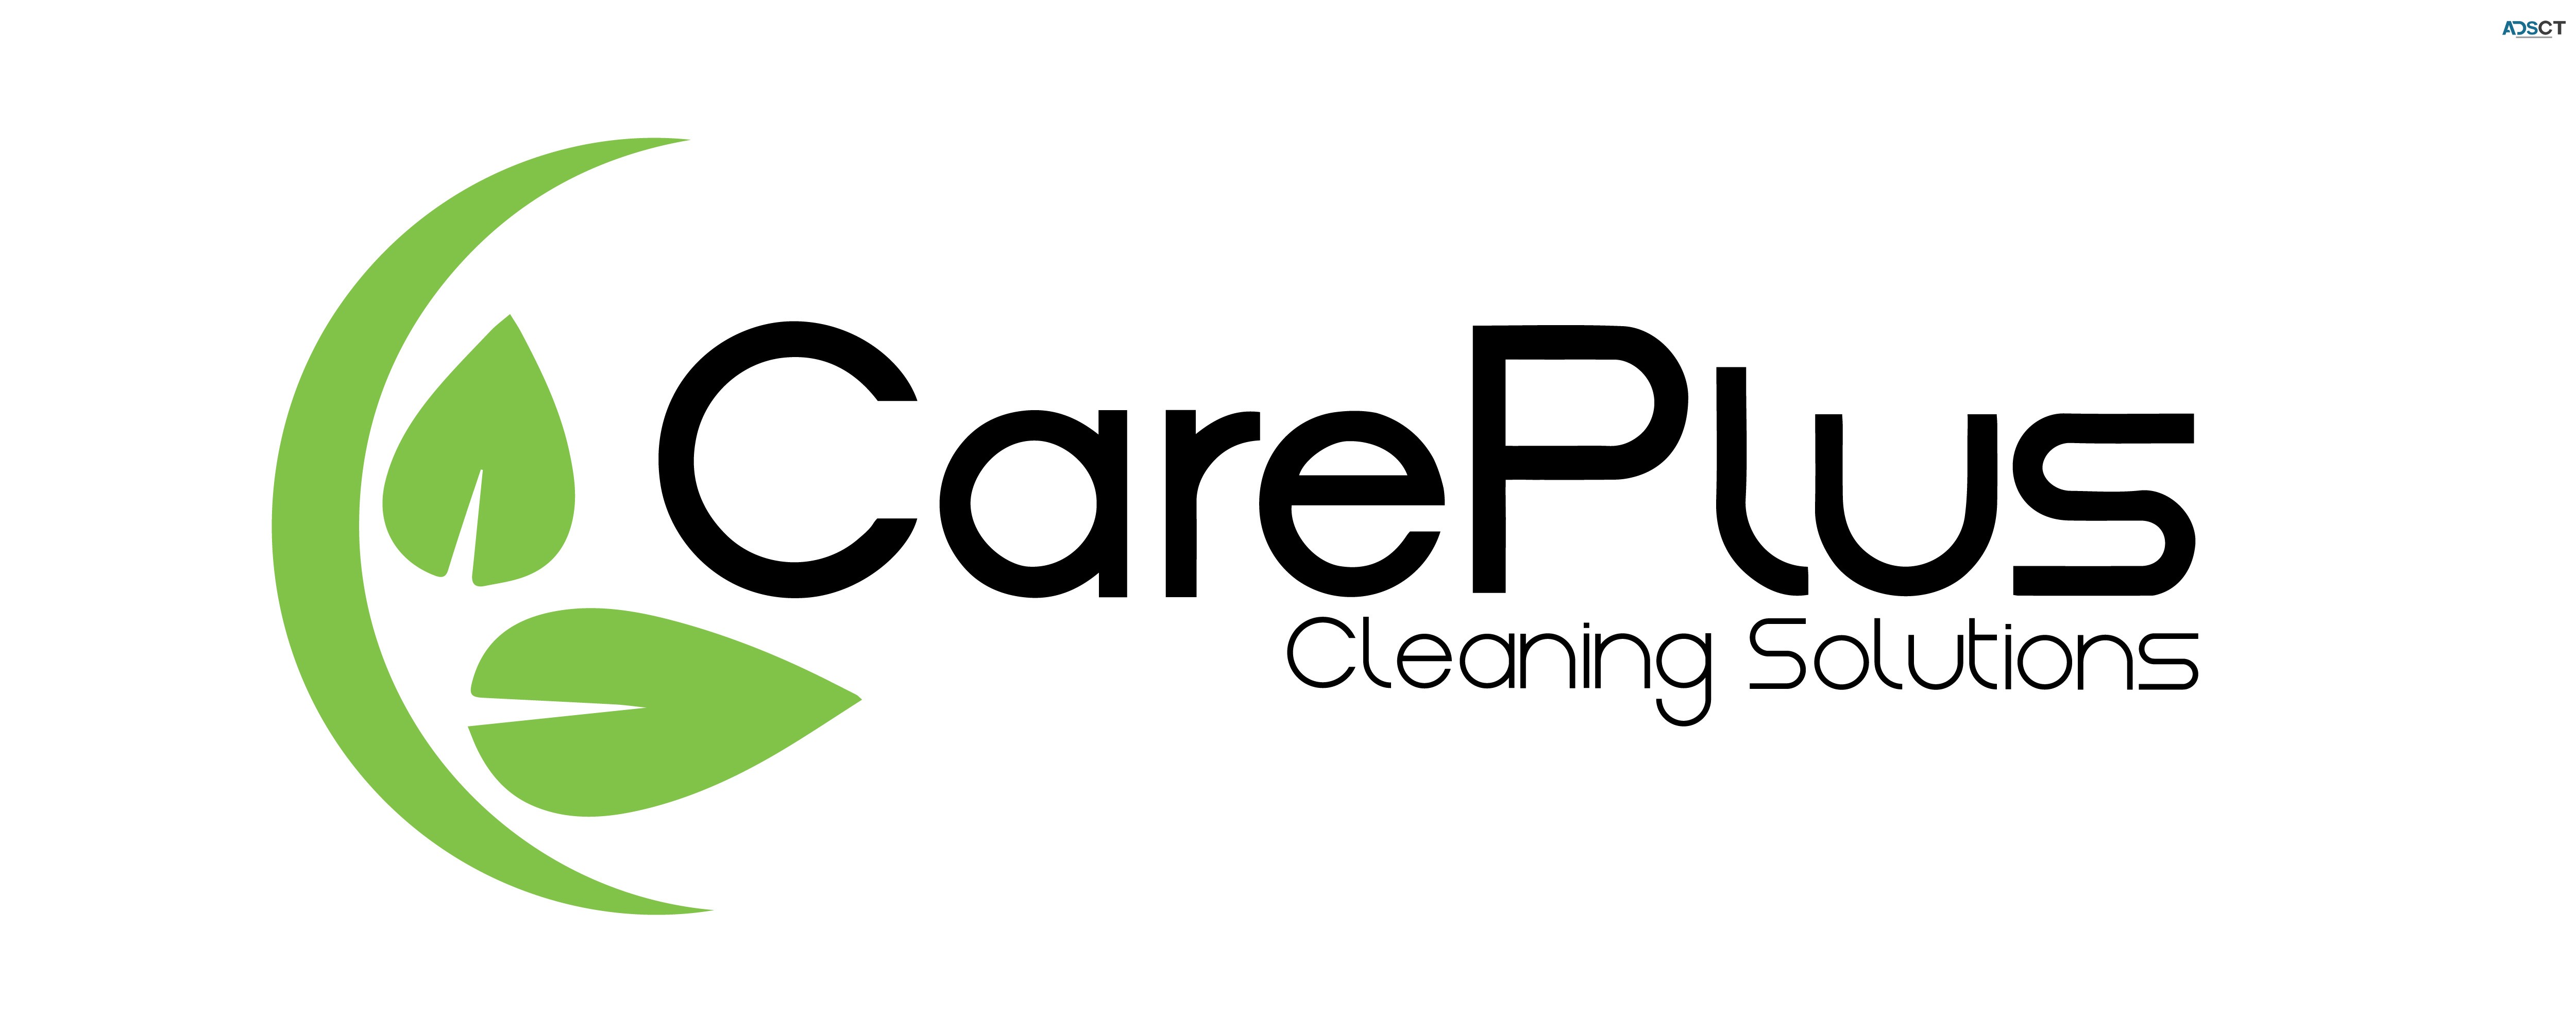 Cleaning Services Melbourne